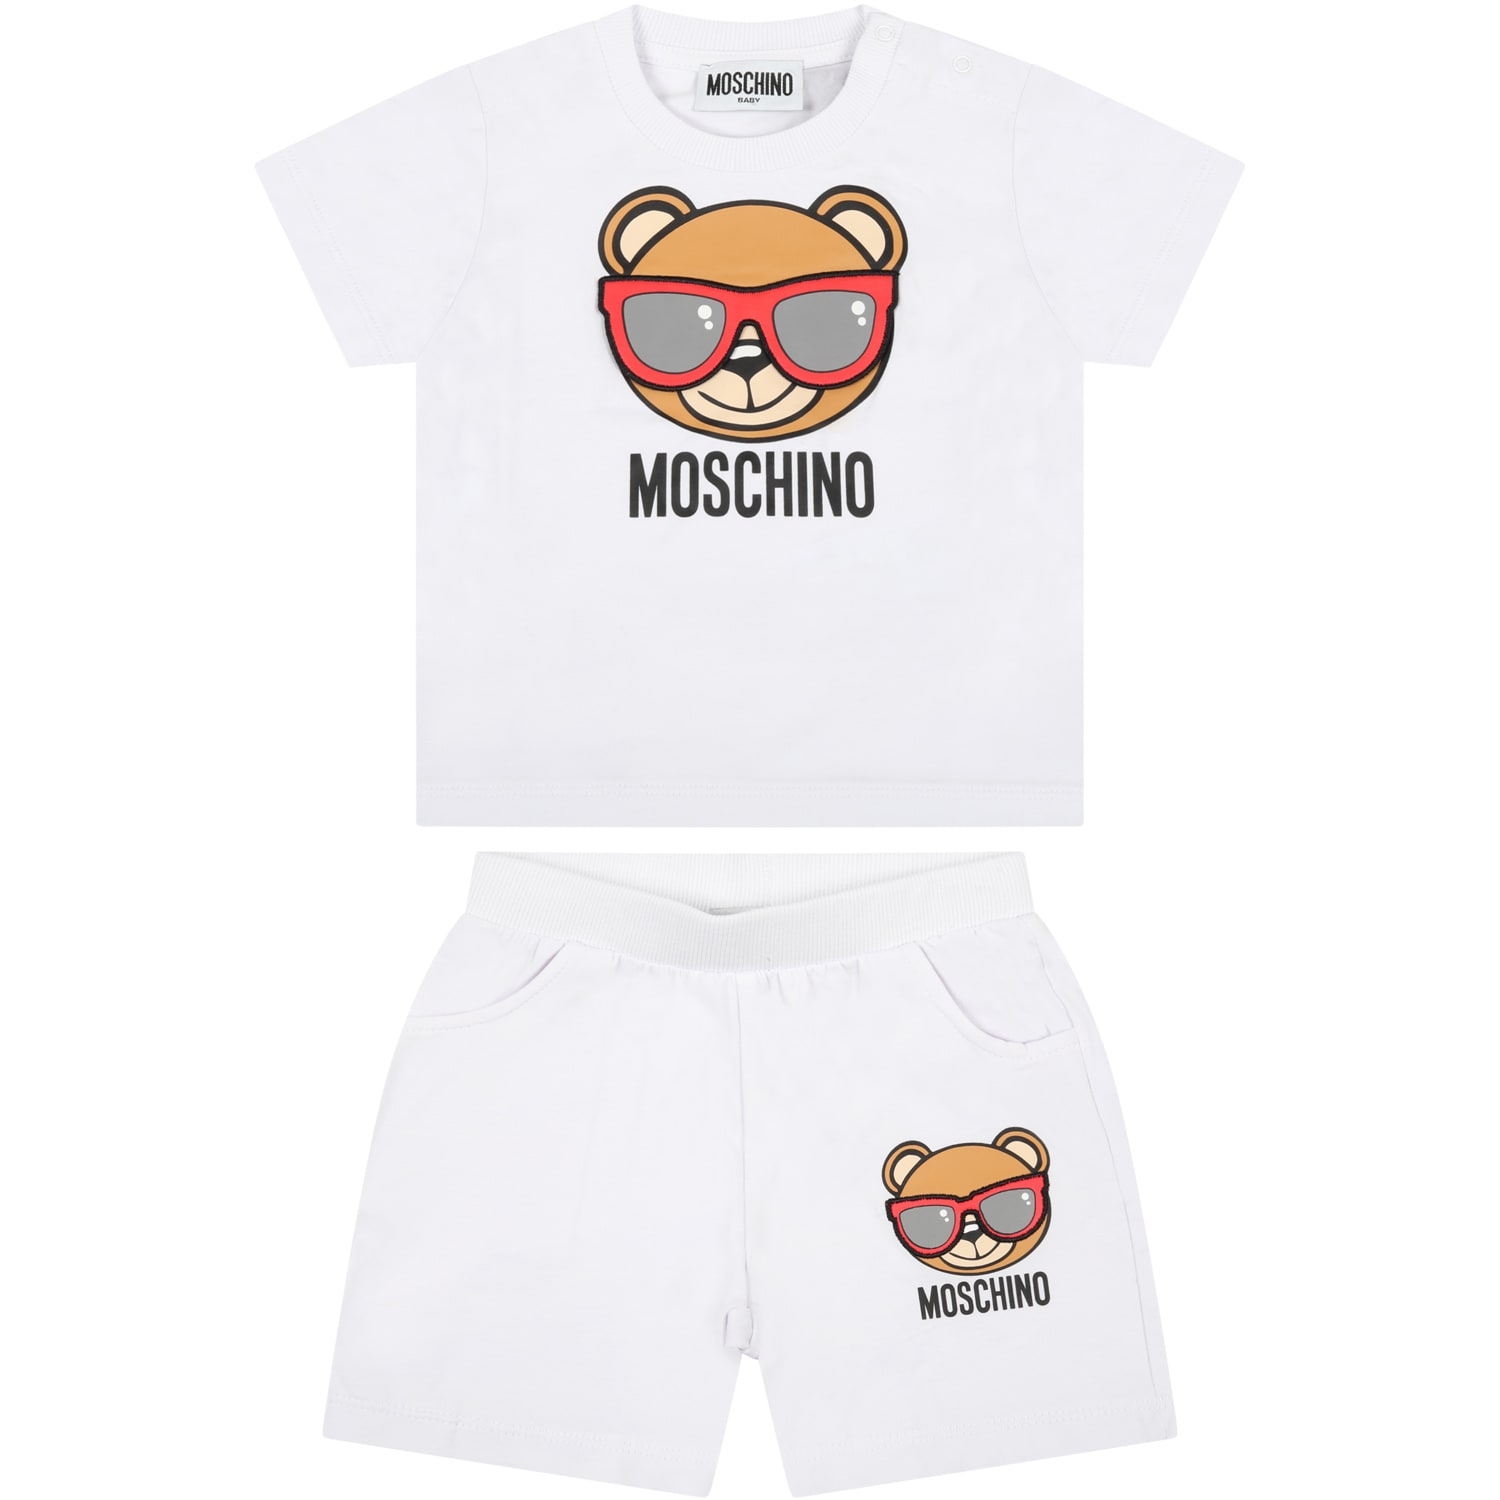 Moschino white set for baby boy with teddy bear